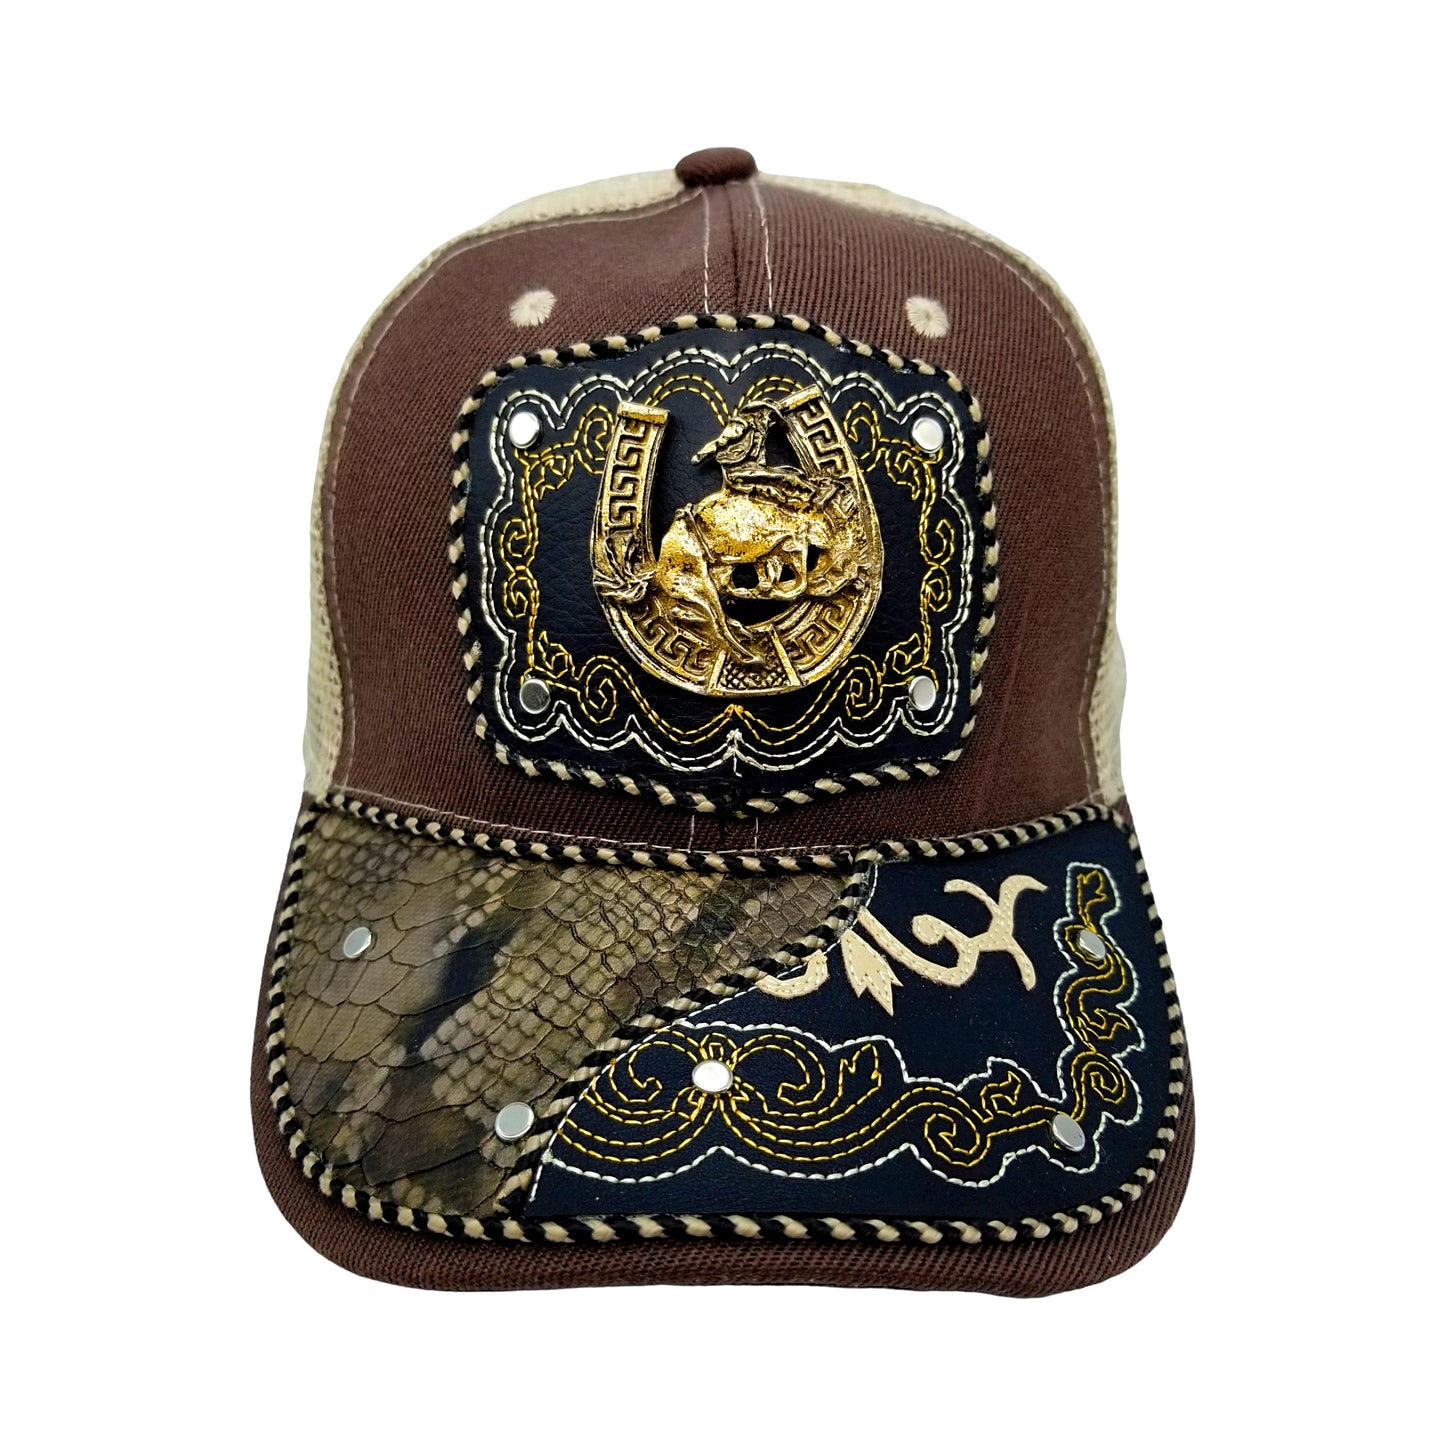 CASQUETTE - COUNTRY URBAIN - 3 - COWBOY RODEO CHEVAL - TERRA ET BLANCHE